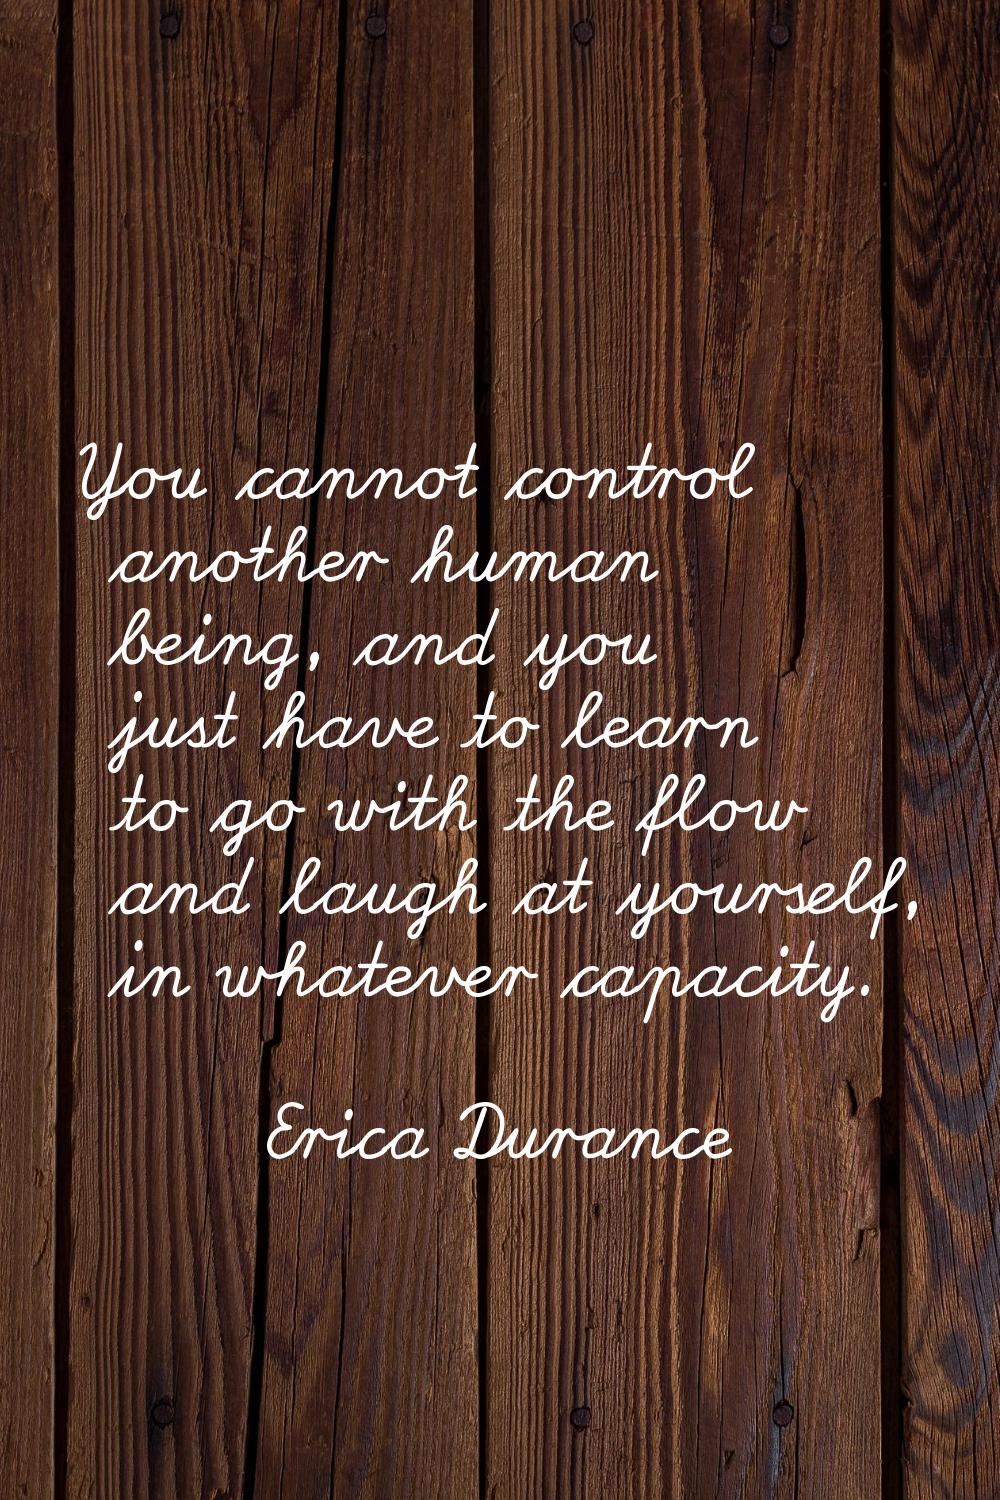 You cannot control another human being, and you just have to learn to go with the flow and laugh at